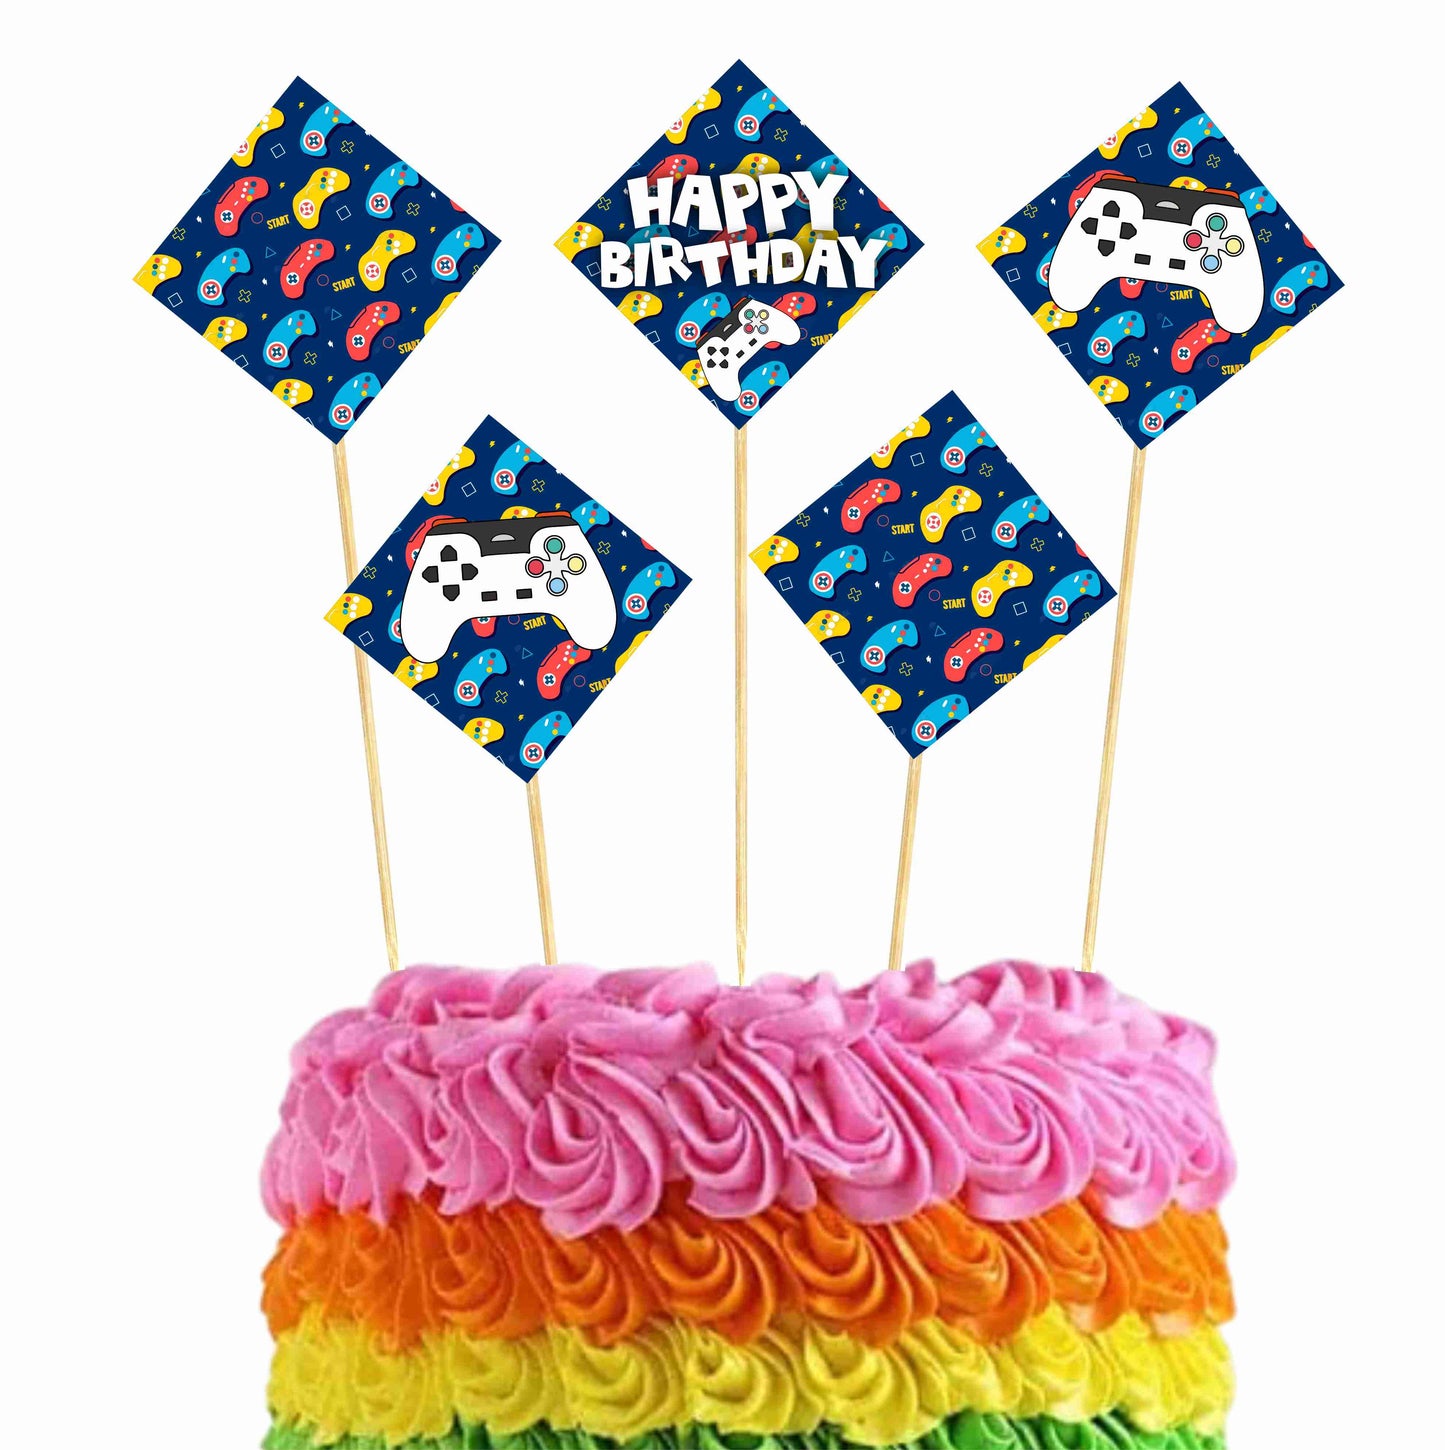 VideoGame Theme Cake Topper Pack of 10 Nos for Birthday Cake Decoration Theme Party Item For Boys Girls Adults Birthday Theme Decor